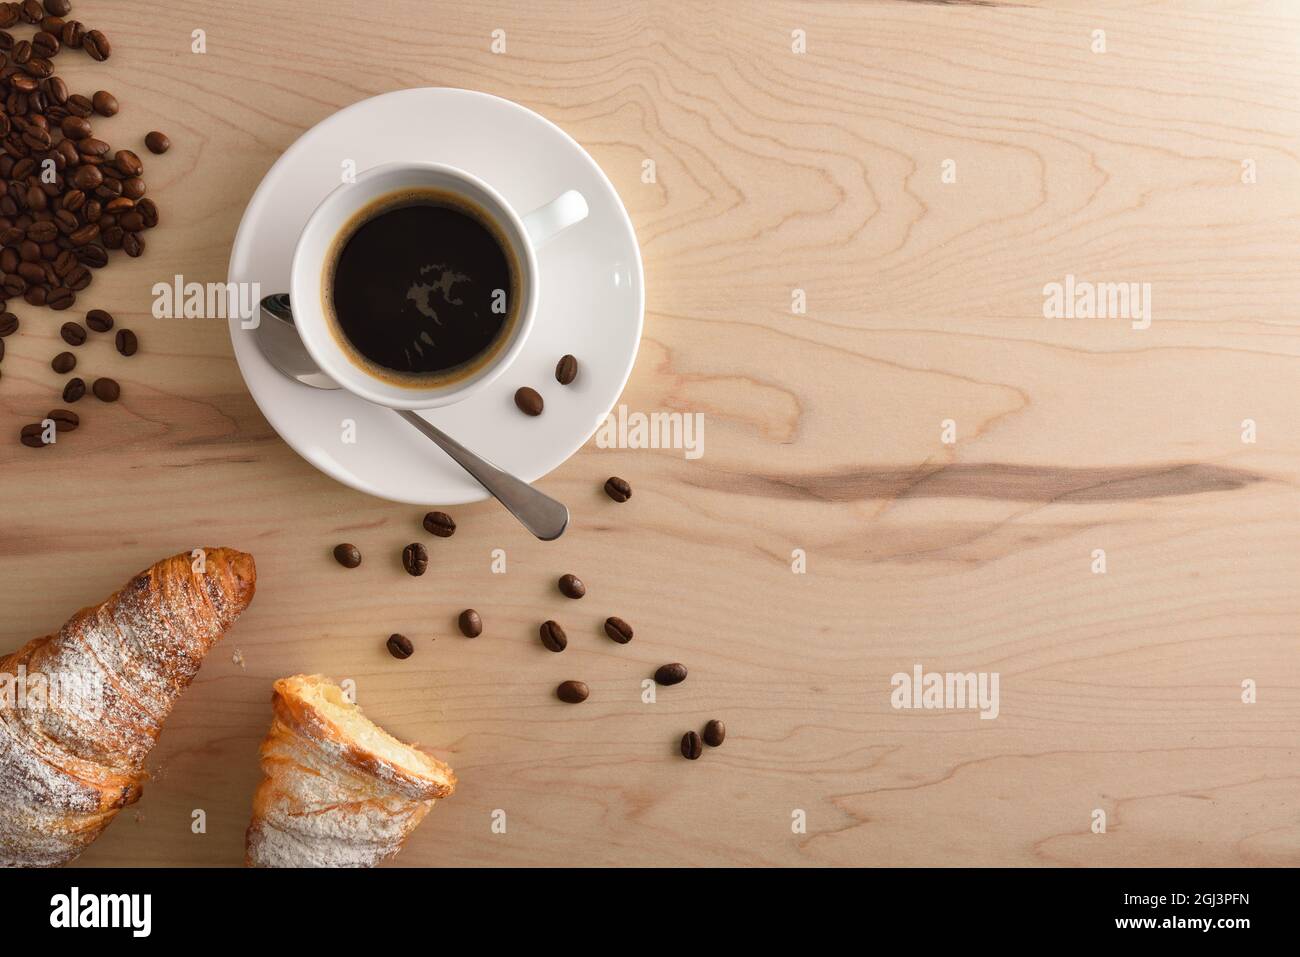 Porcelain white cup with hot coffee, croissant and beans on brown wooden table at breakfast. Top view. Horizontal composition. Stock Photo